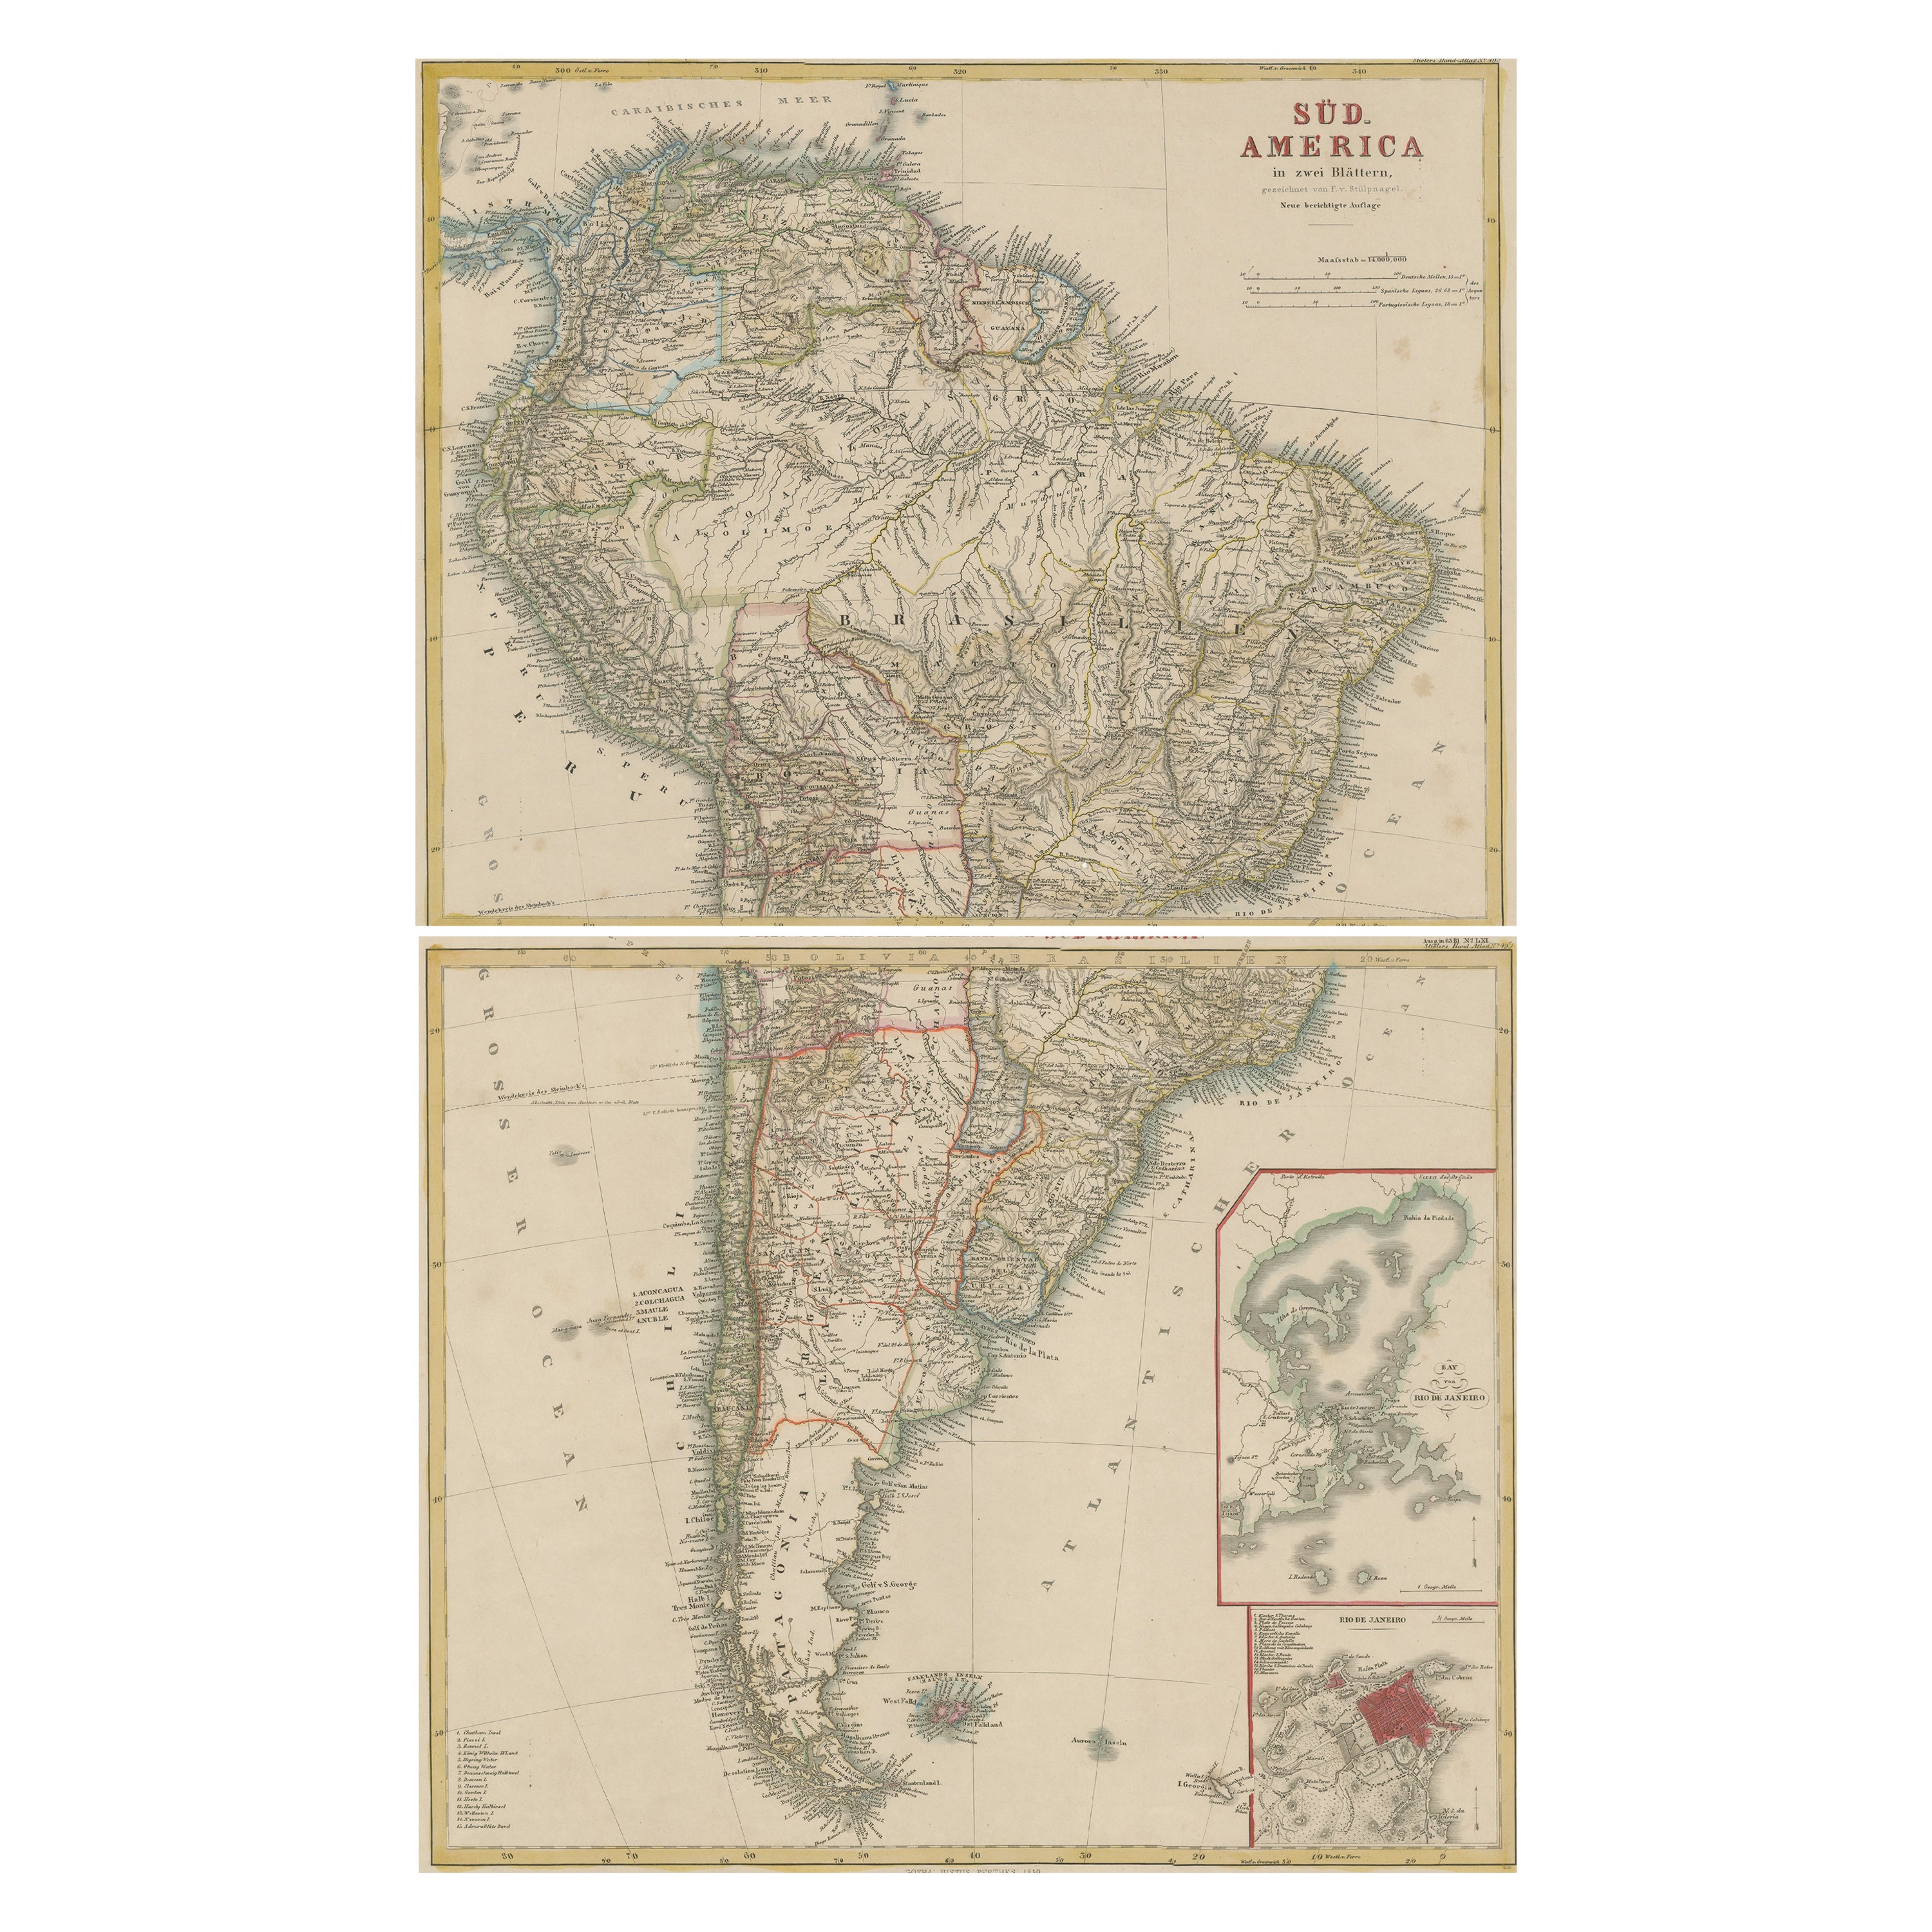 Set of Two Antique Maps of South America with Inset Maps of Rio de Janeiro For Sale